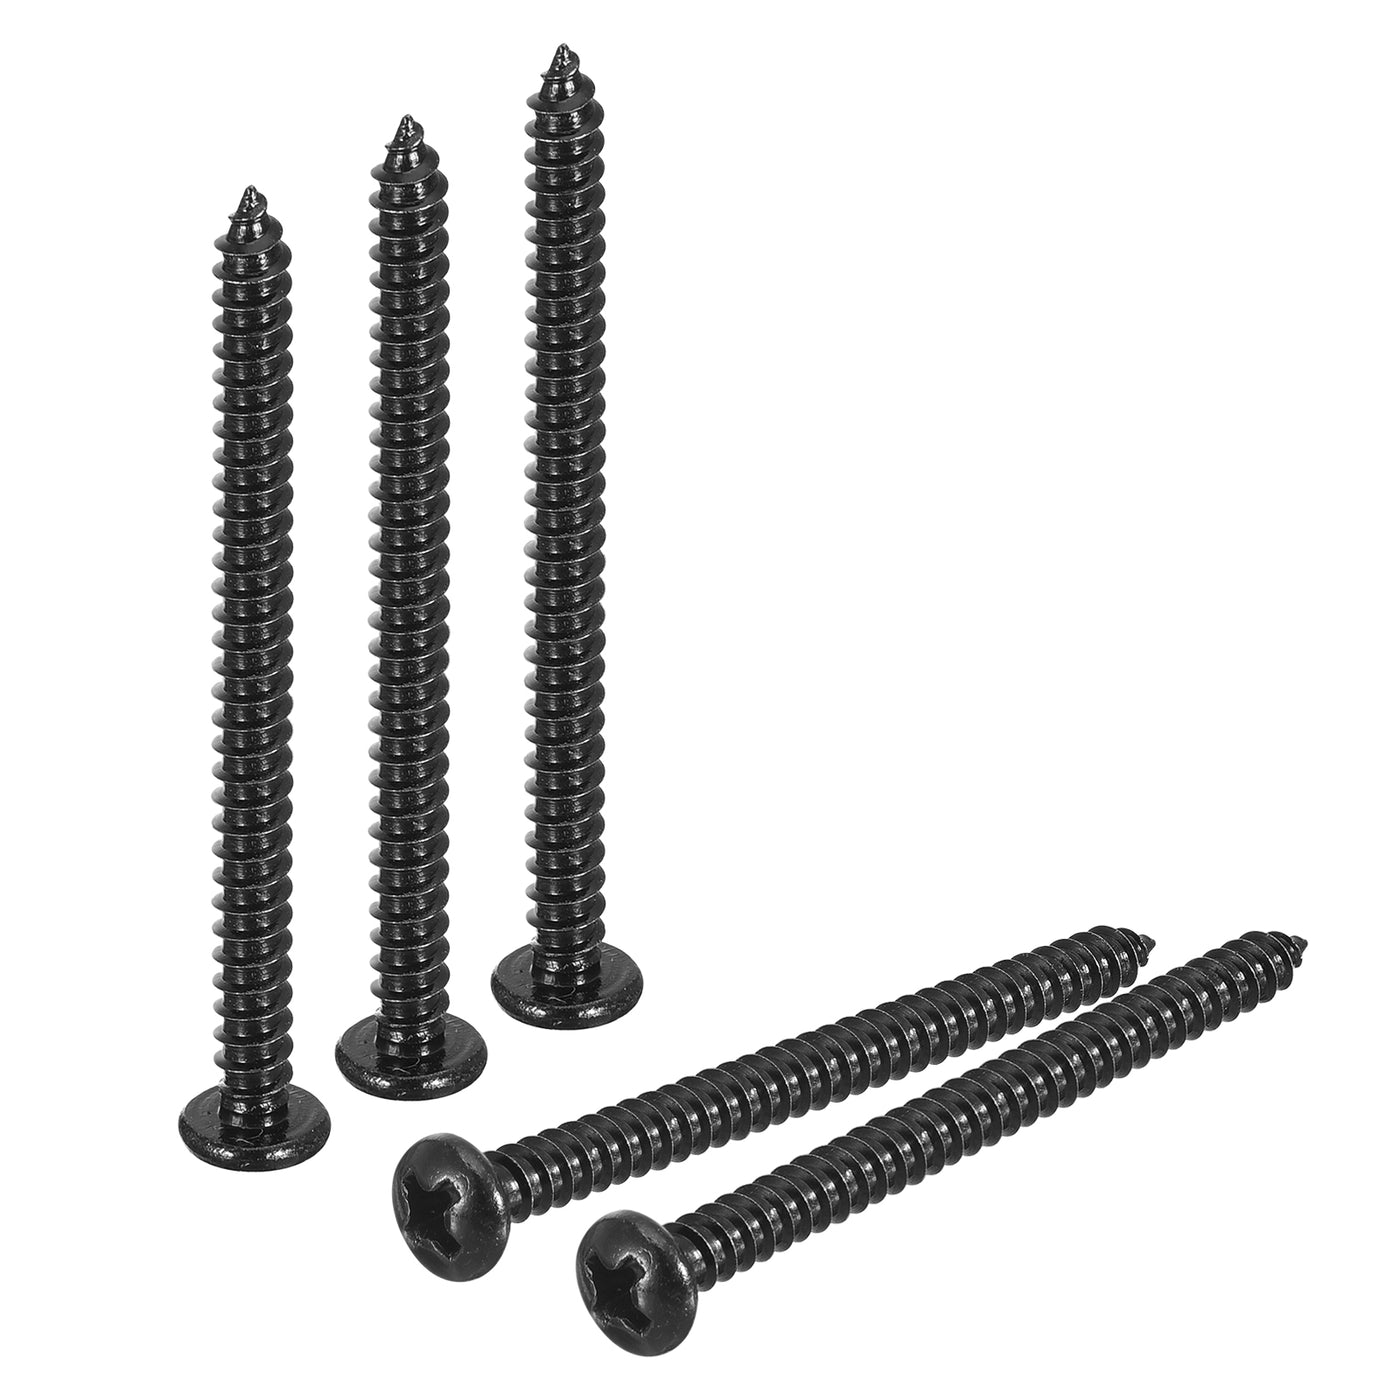 uxcell Uxcell #6 x 1-3/4" Phillips Pan Head Self-tapping Screw, 100pcs - 304 Stainless Steel Round Head Wood Screw Full Thread (Black)